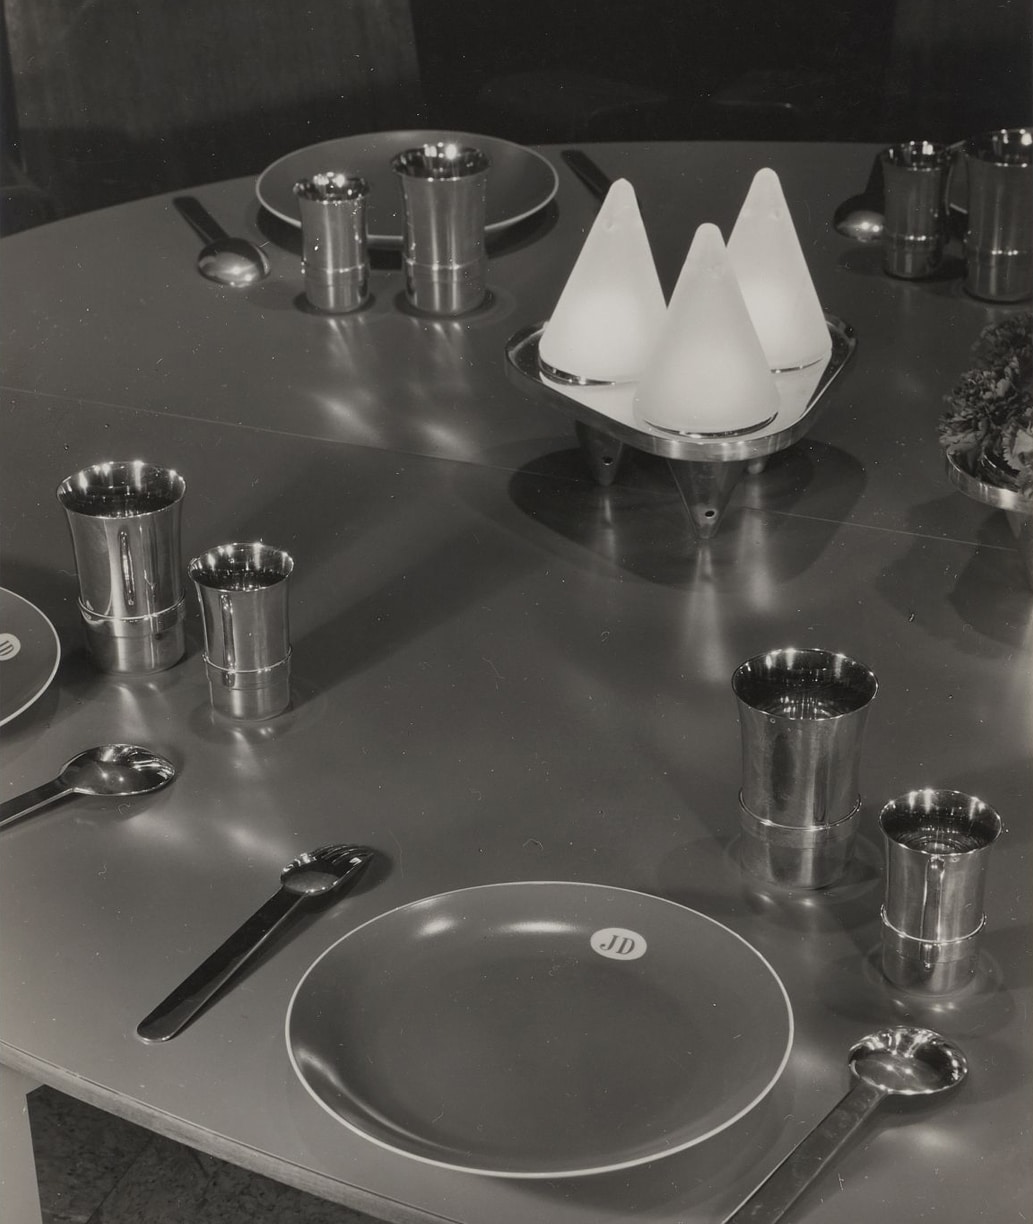 Dressed table photographed in black and white